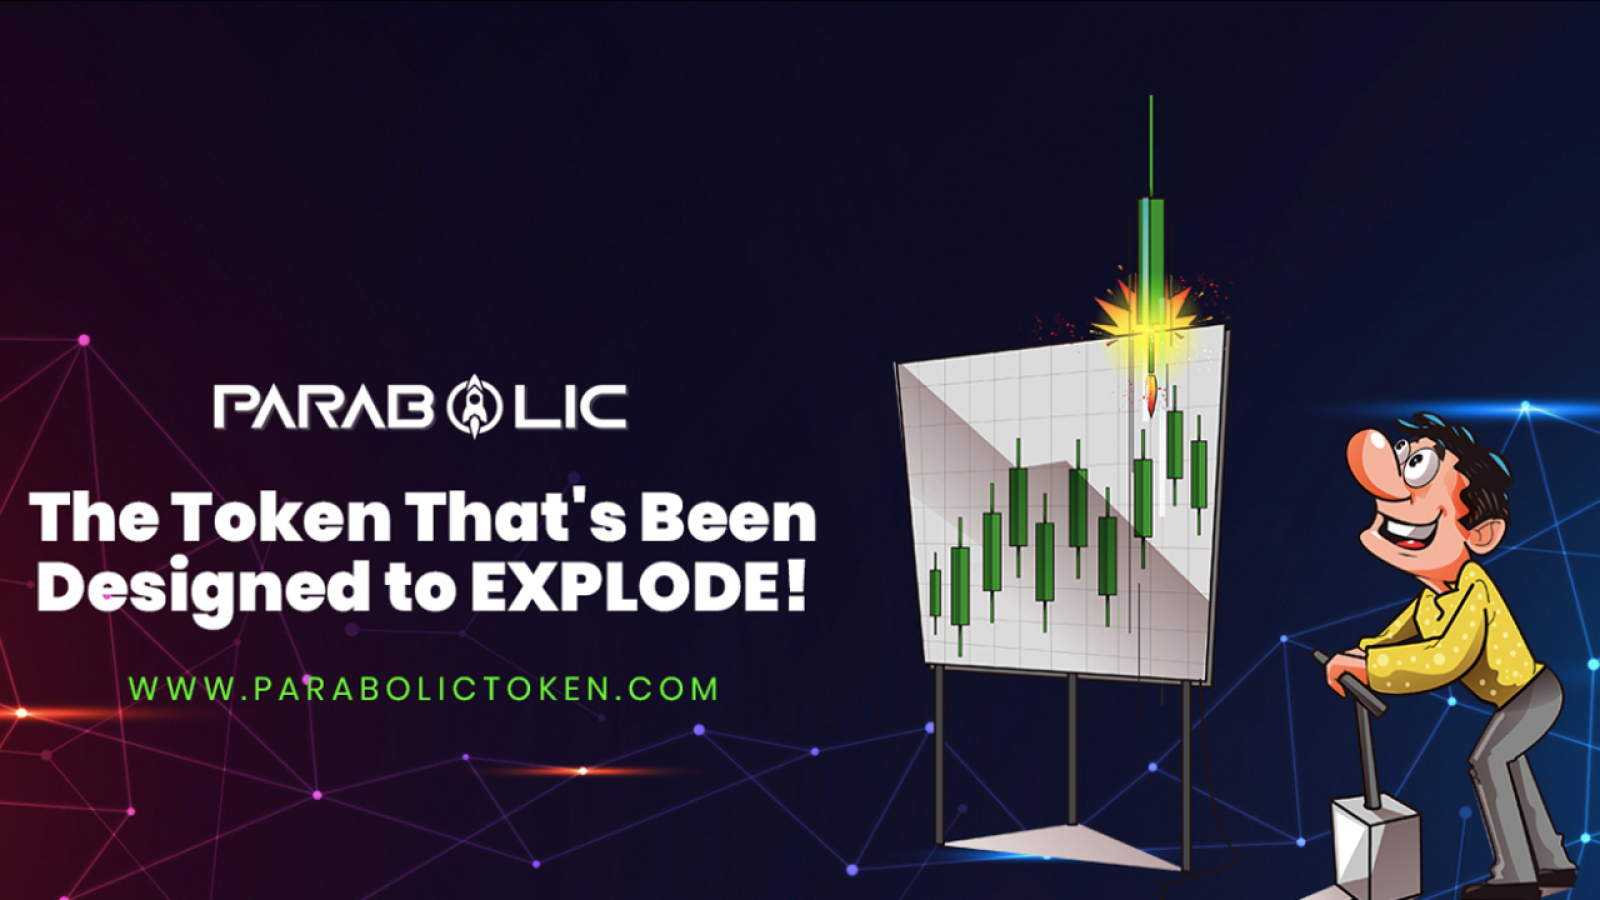 Parabolic: The Relaunch We Had All Been Waiting For